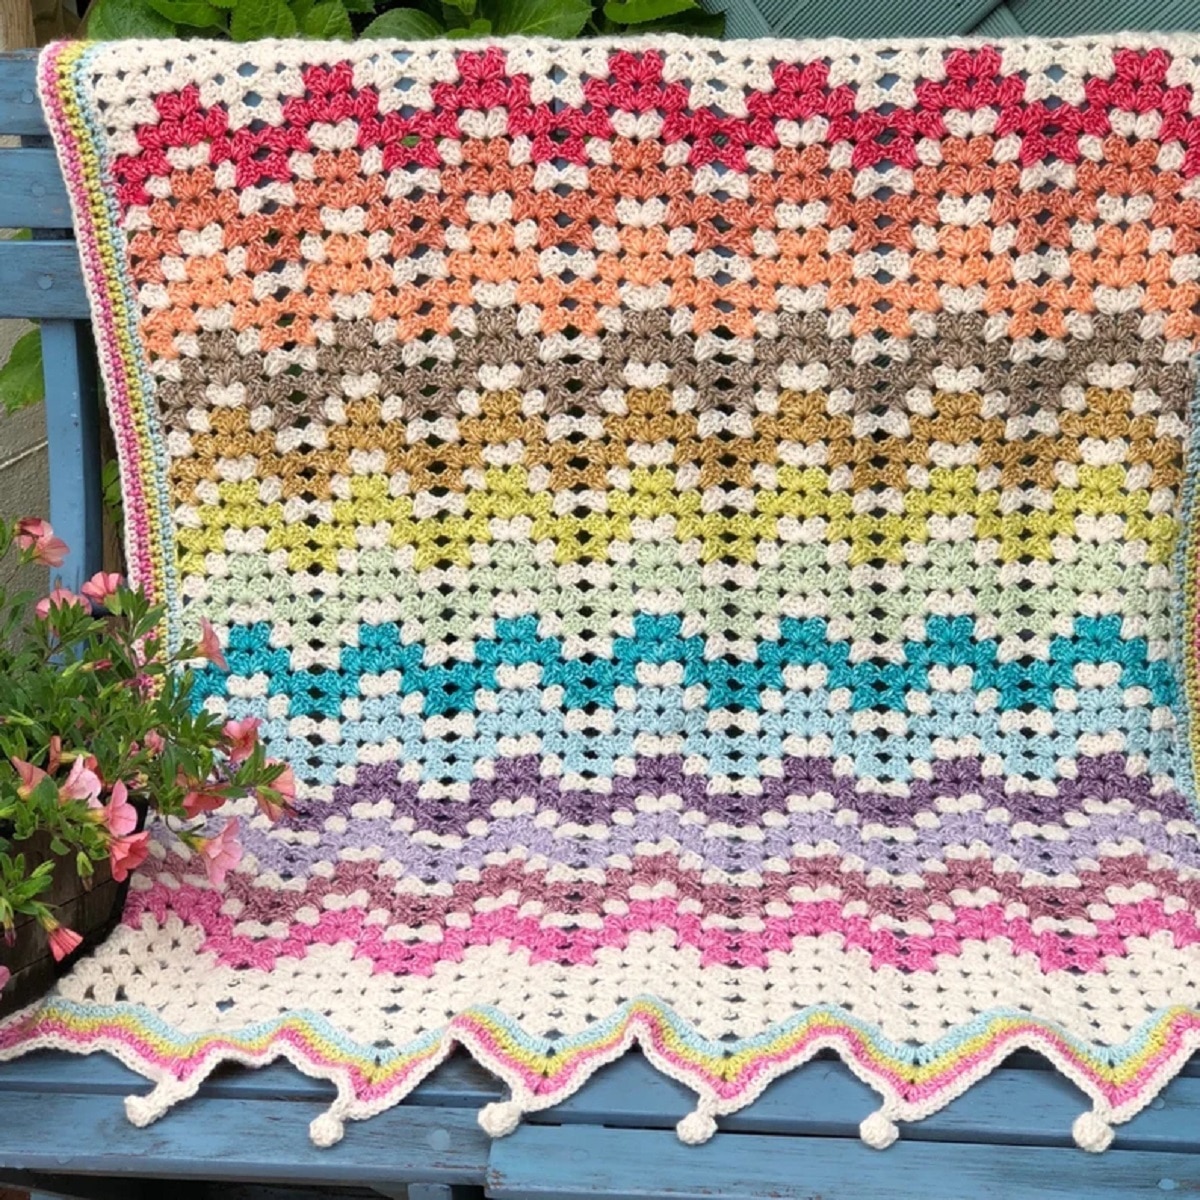 Rainbow colored crochet blanket using a granny ripple stitch with small white bobbles along the bottom draped over a blue bench.